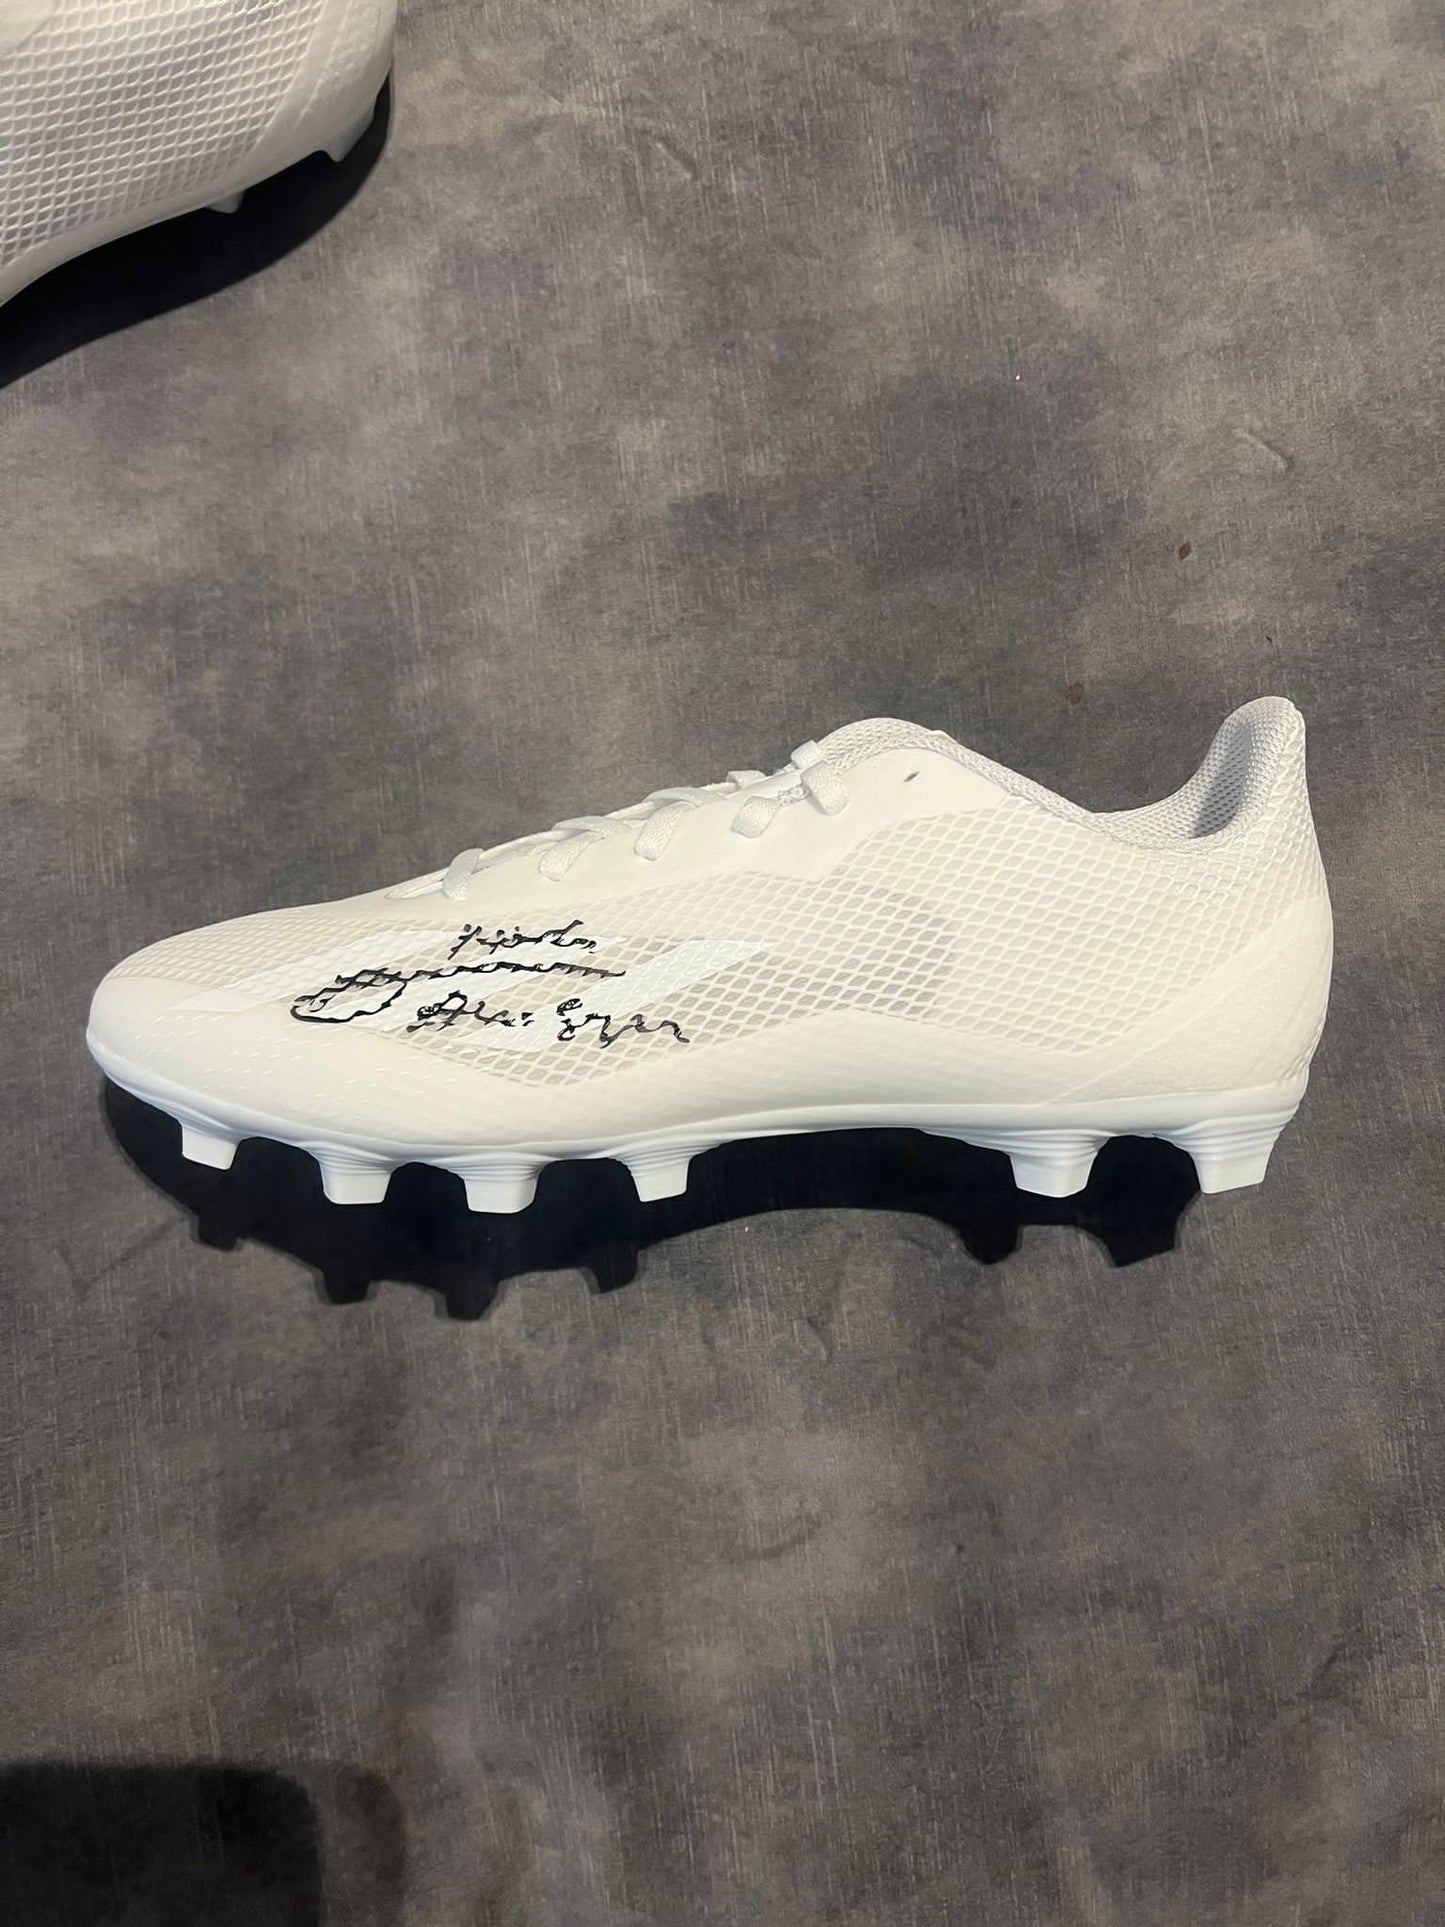 Alexis Mac Allister signed WHITE ADIDAS BOOT